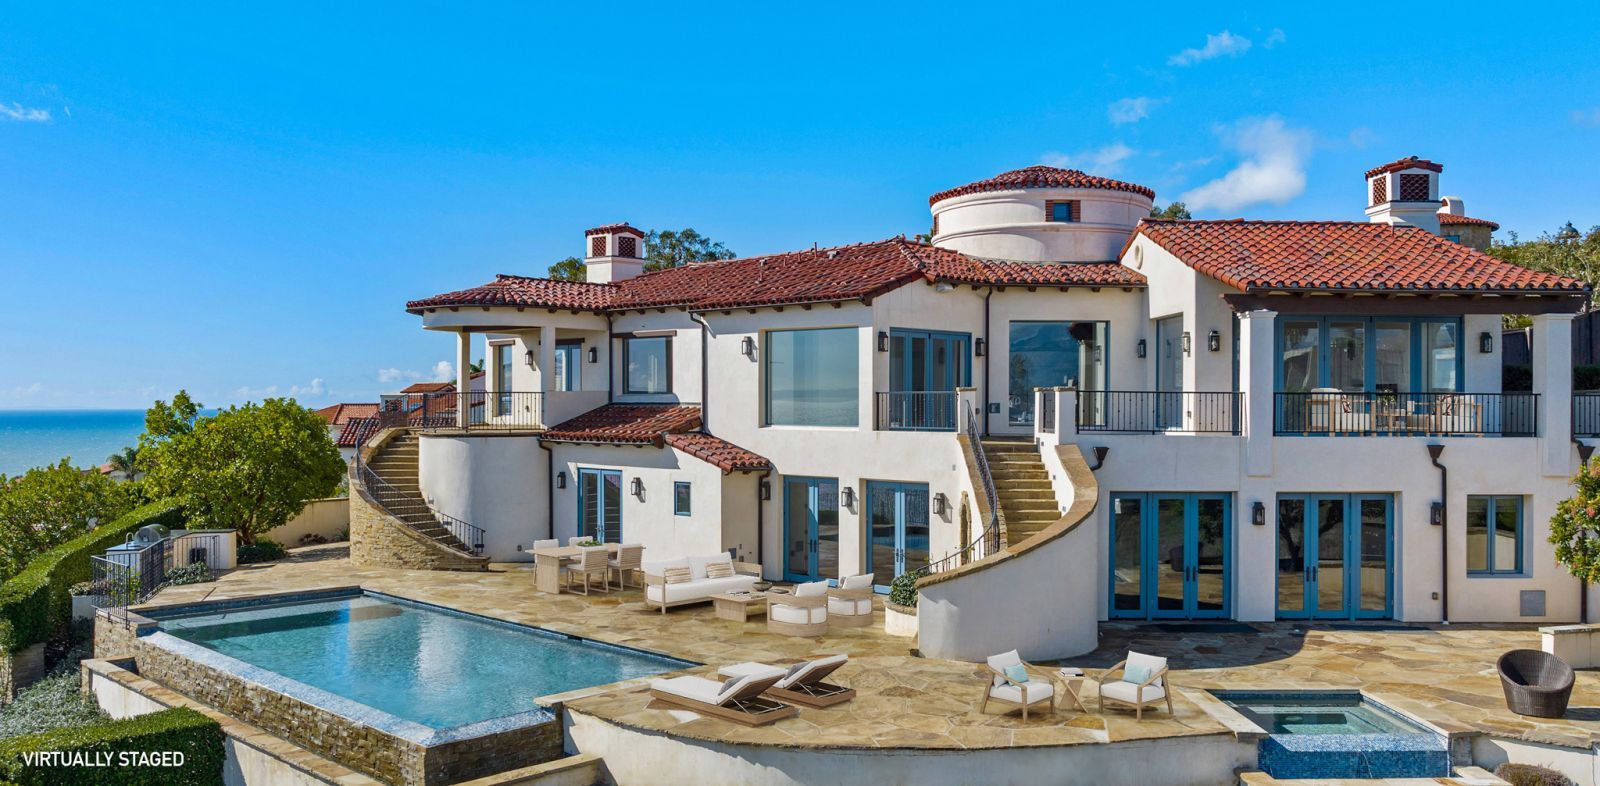 A large, two-story Mediterranean home with white stucco walls, a red tile roof, terraces, and a sparkling blue pool.